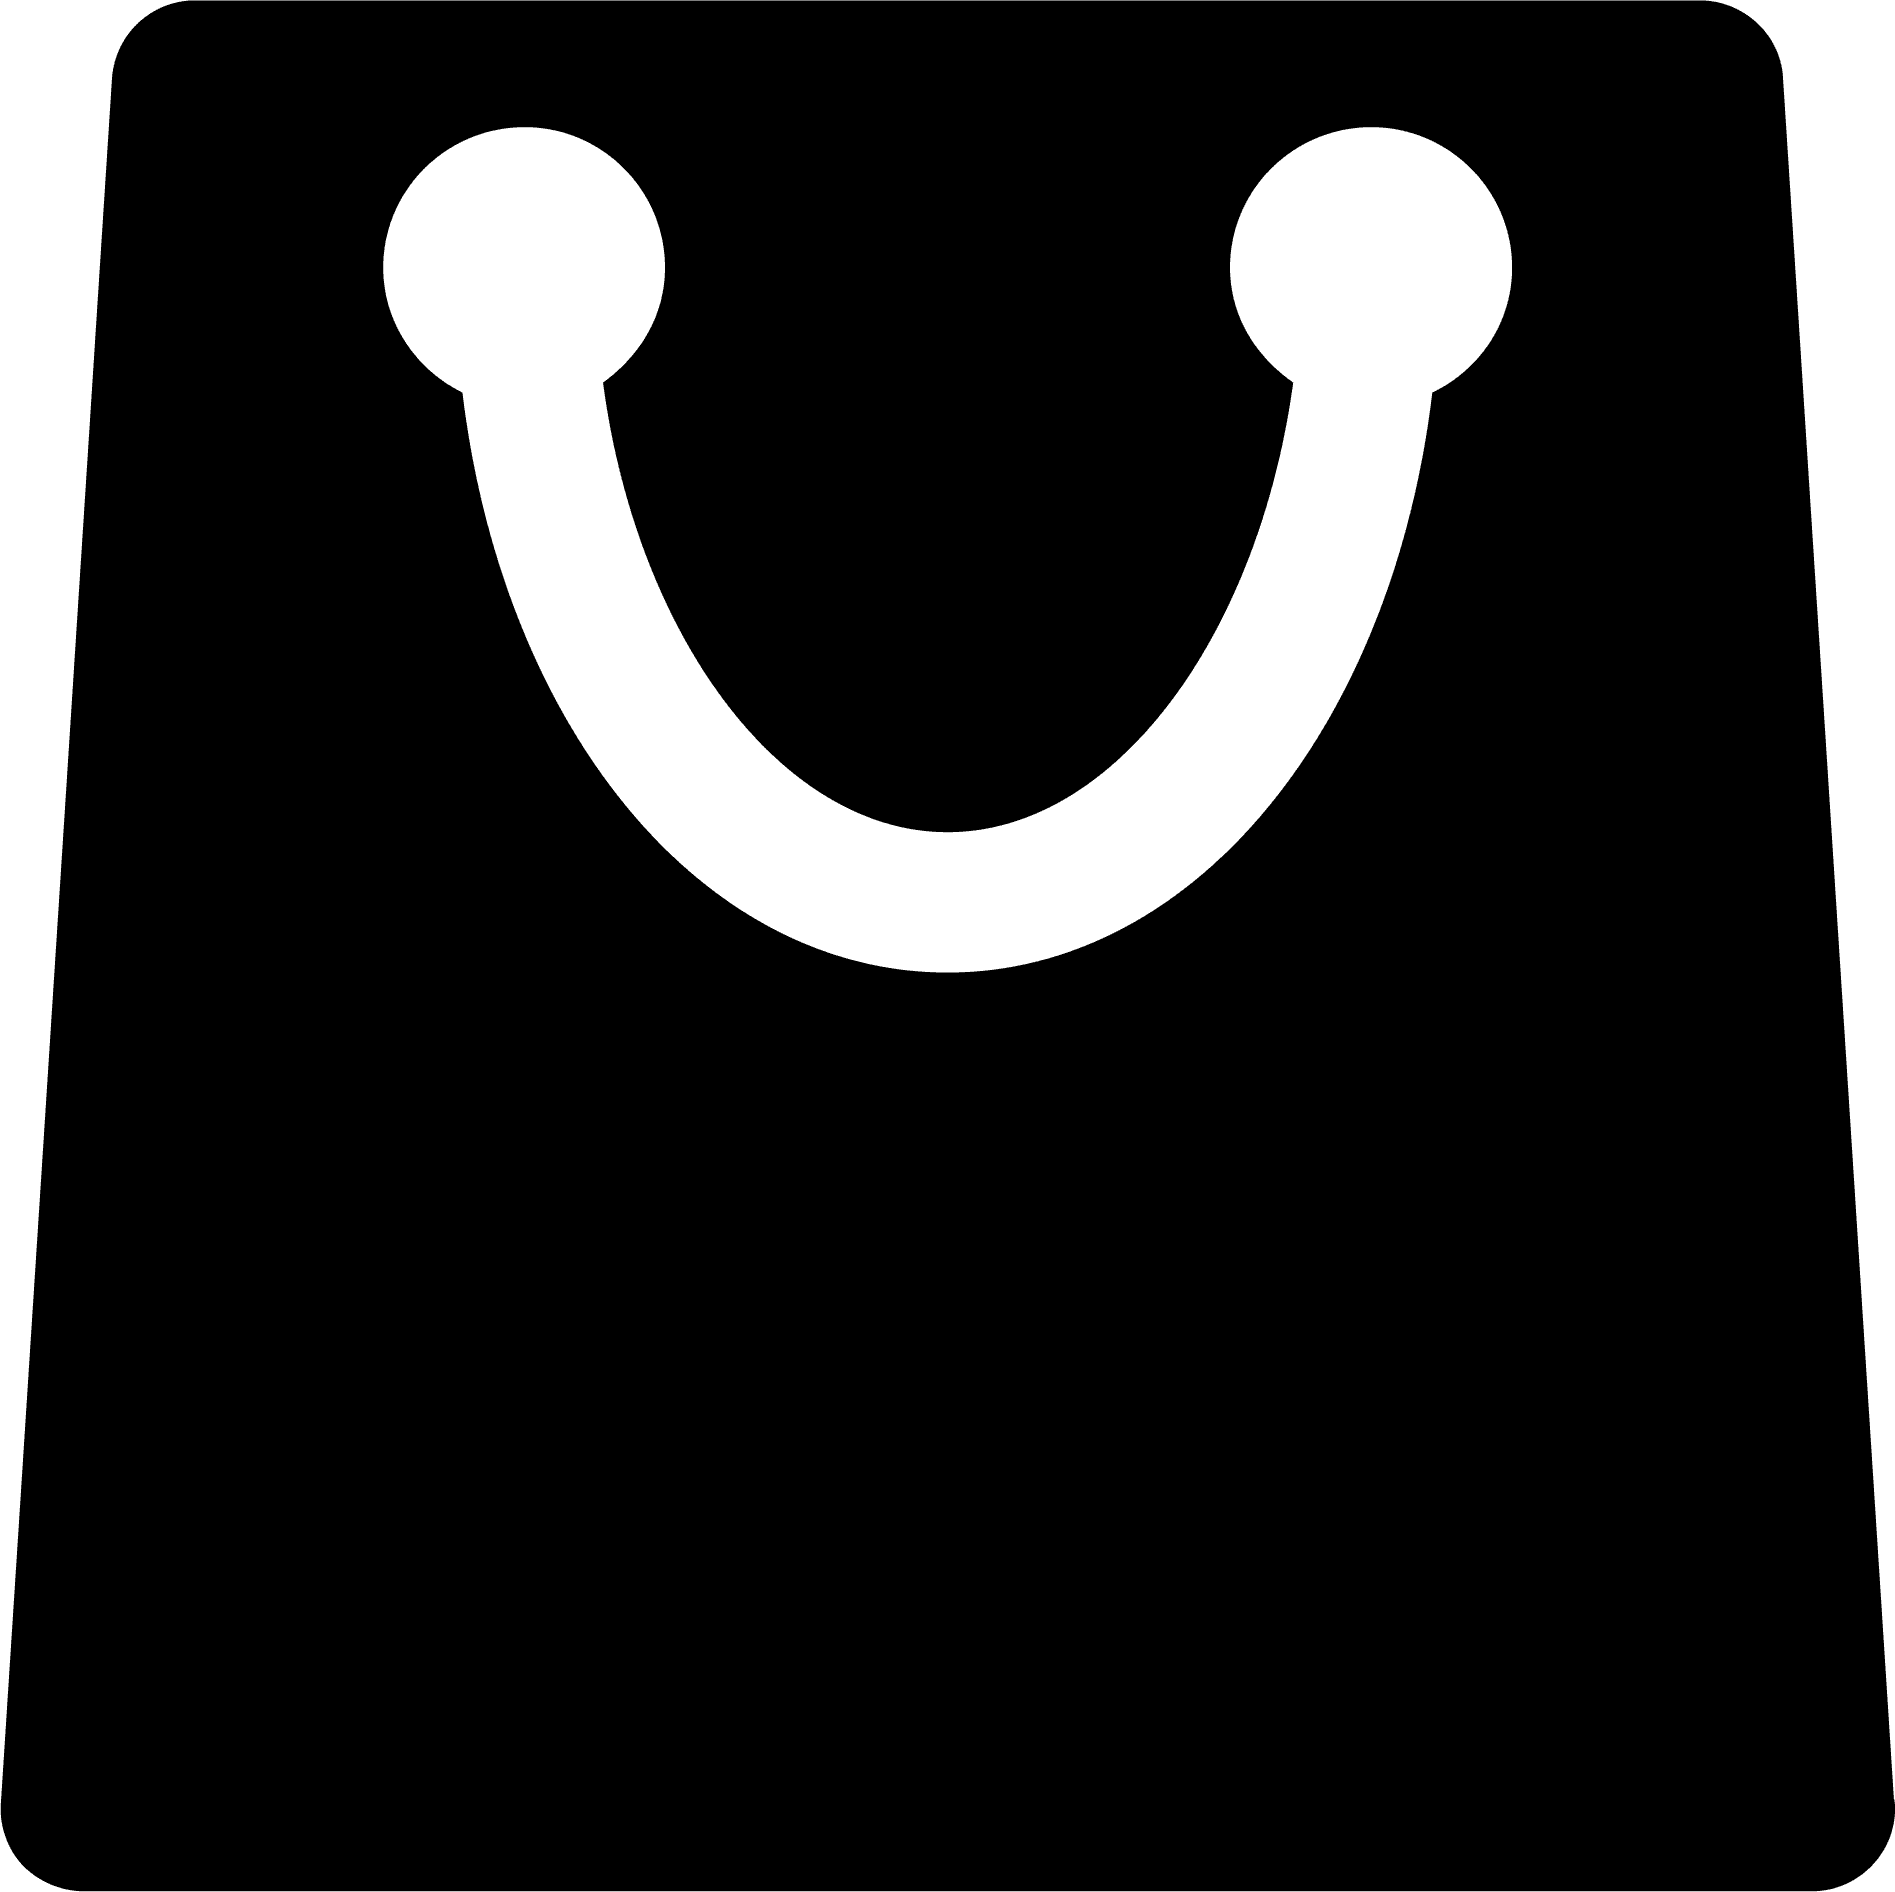 symphony-use-cases-icon-retail